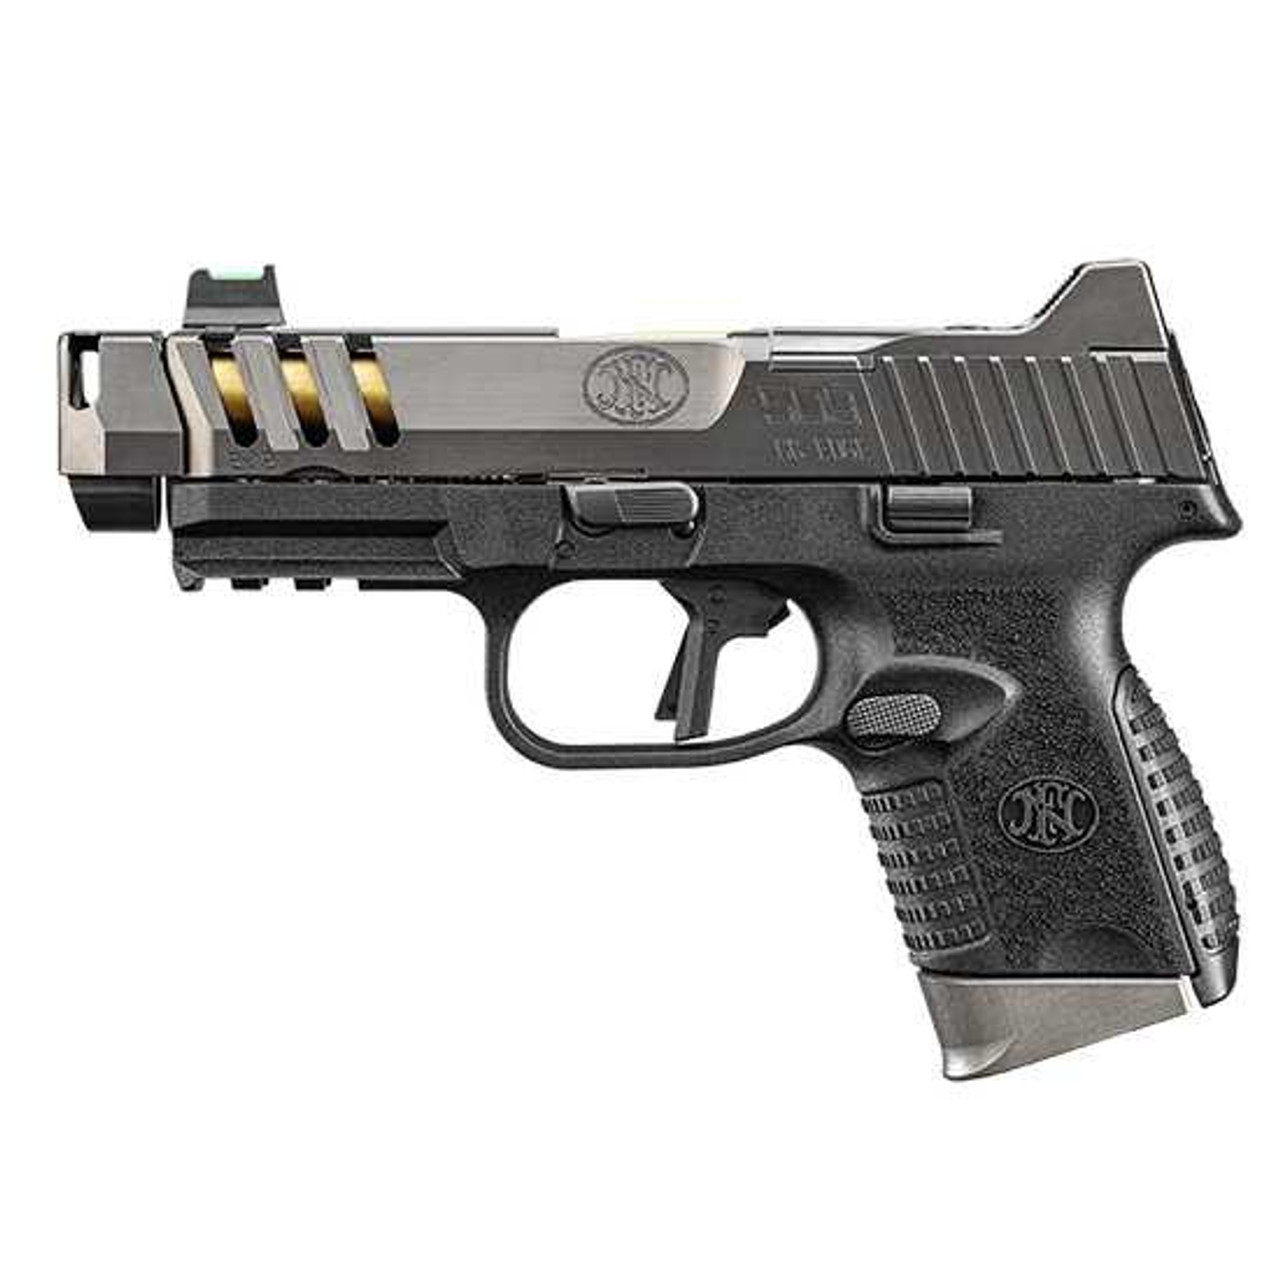 FN 509 CC EDGE NMS 9MM 4.2" BLK/GRY 12/15RD